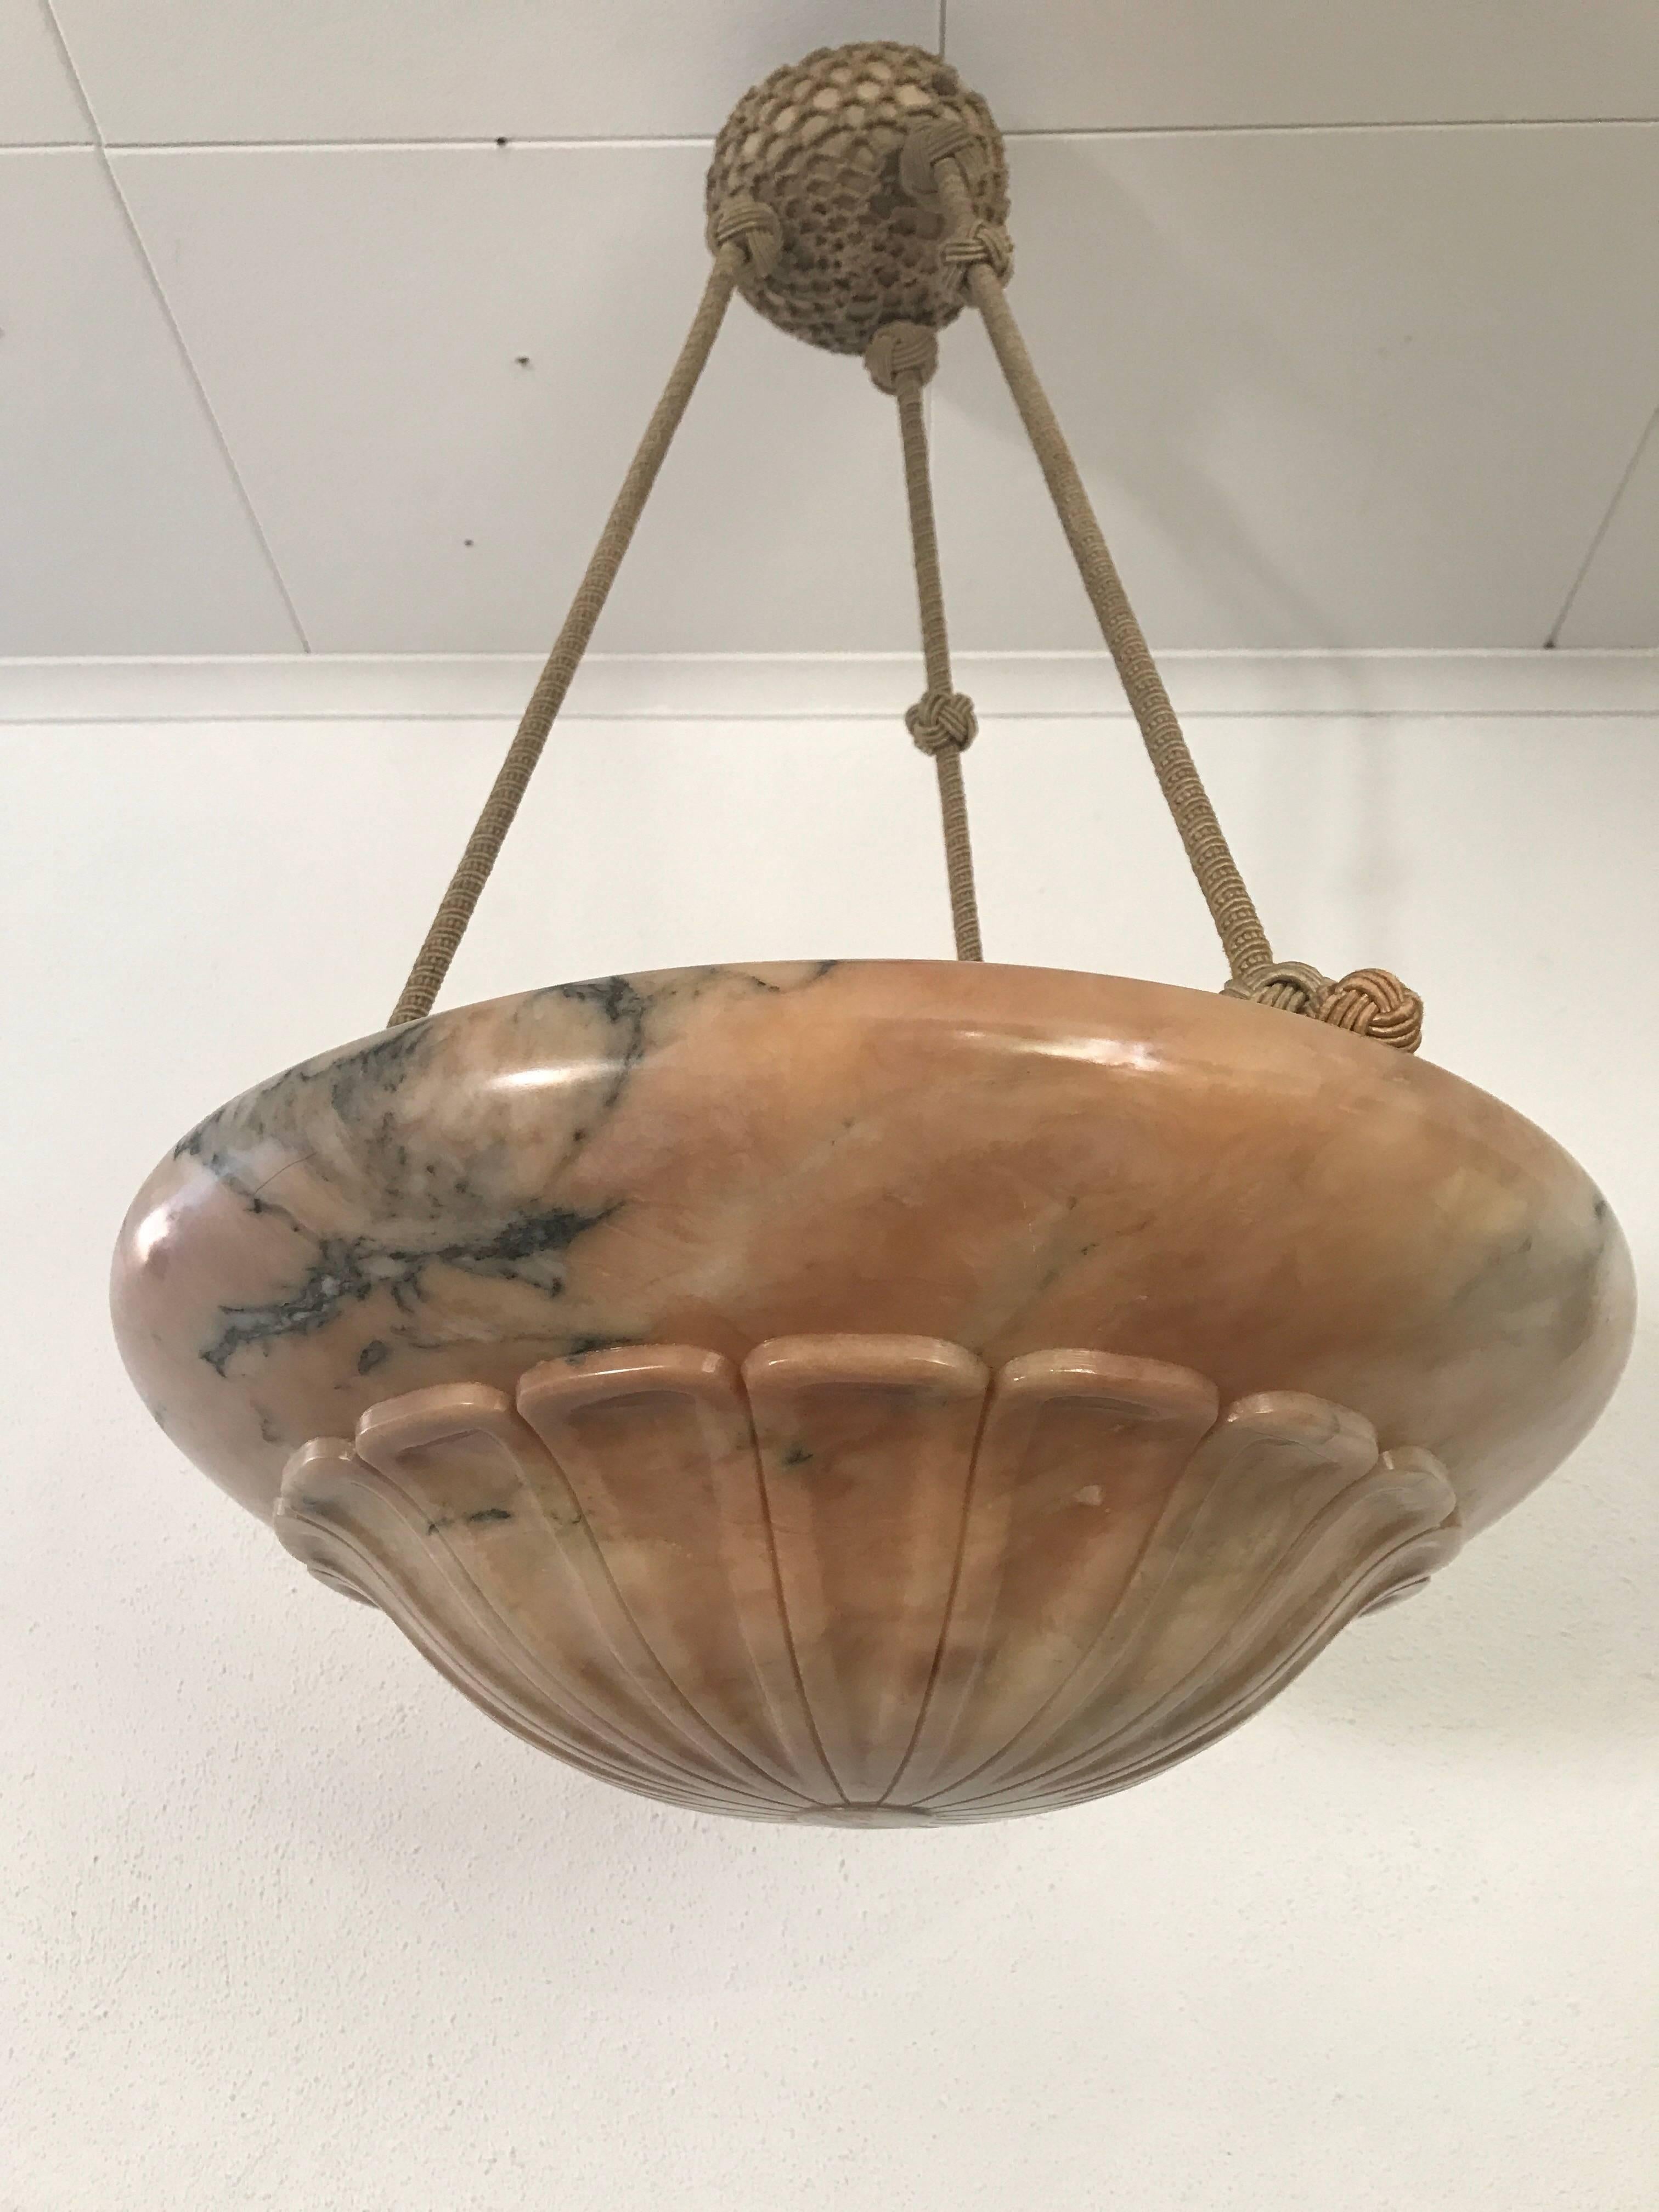 Swedish Art Nouveau Jugendstil carved Alabaster pendant lamp chandelier.
A very nice and beautiful carved alabaster terracotta coloured pendant lamp made circa 1915. The lamp is in a very nice original working condition and all the wires has been